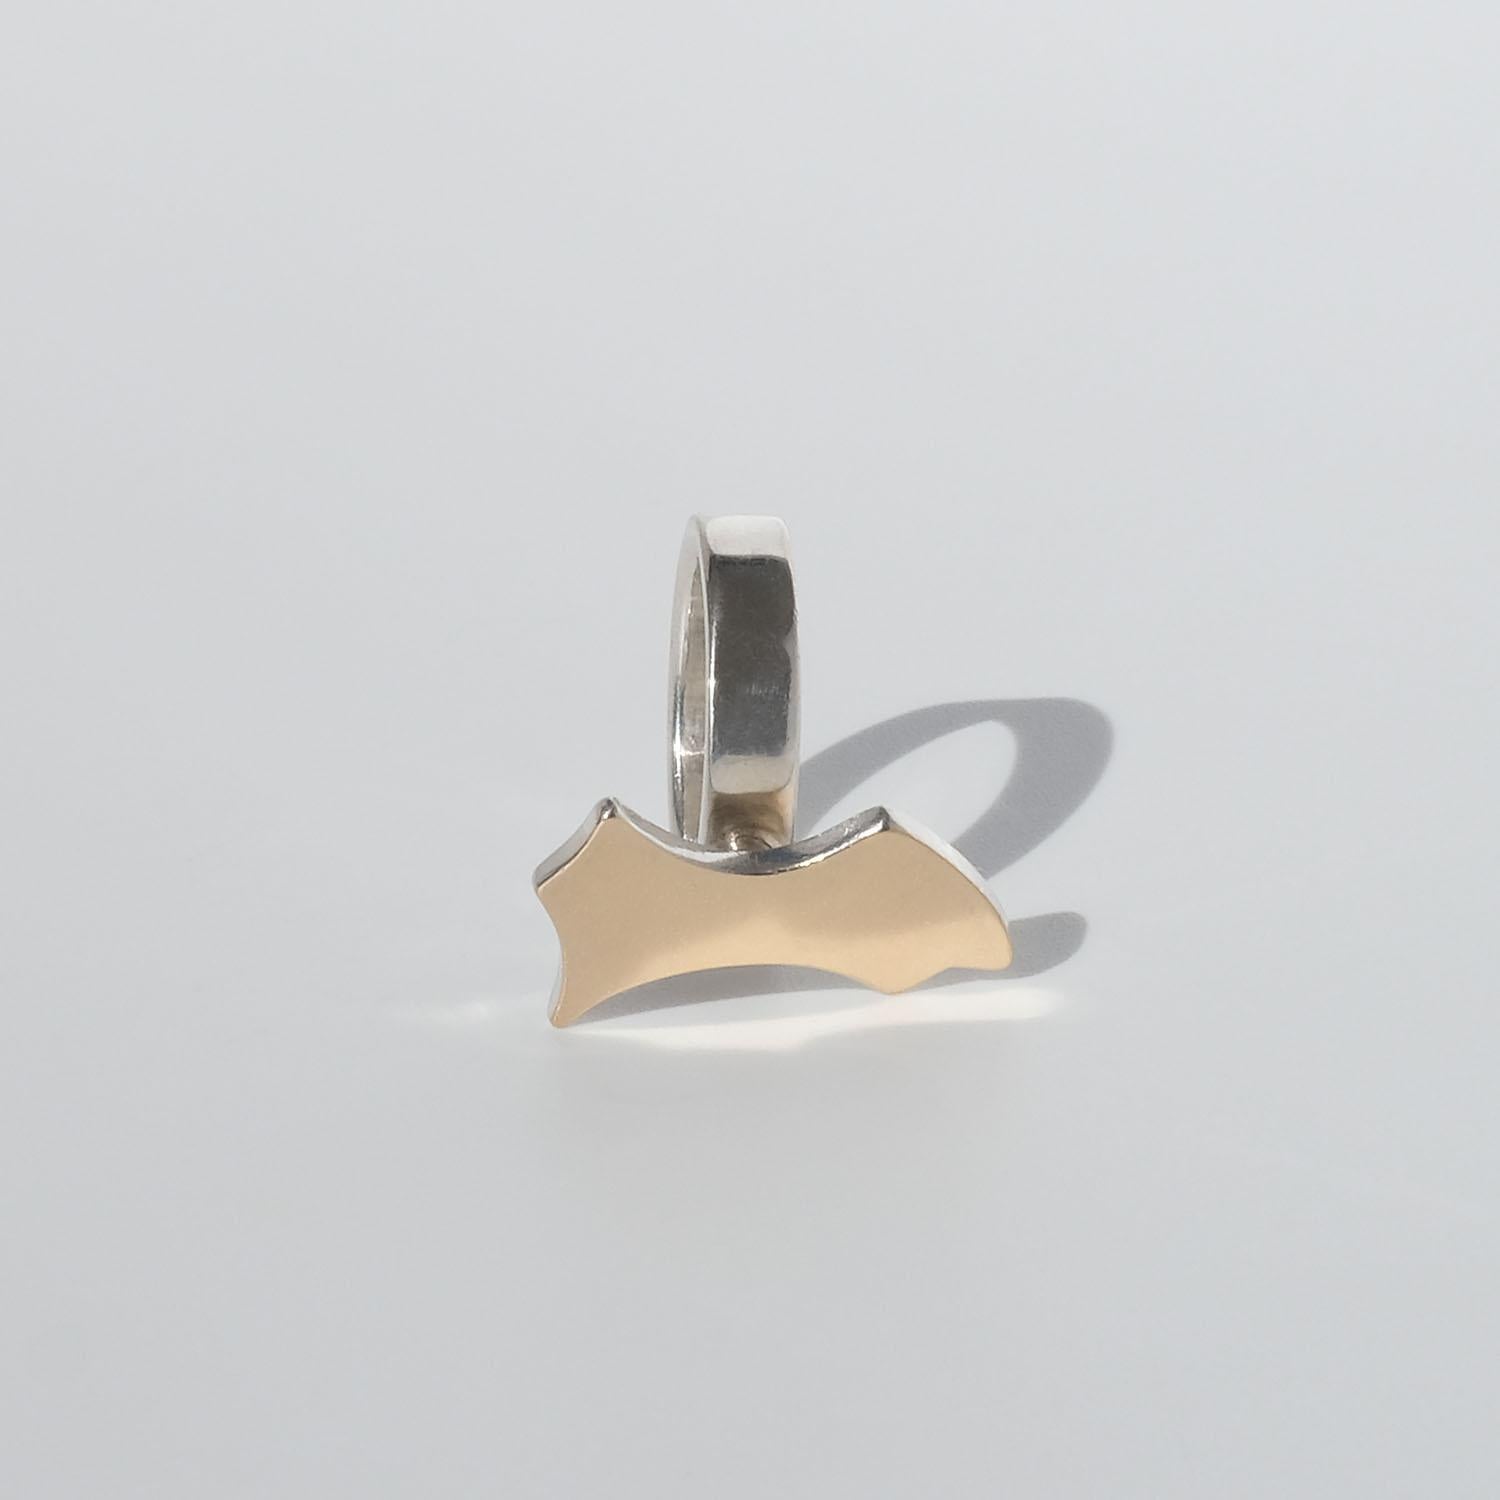 Asymmetrical Silver and Gold Ring by Swedish Master Sigurd Persson, Year 1978 For Sale 5